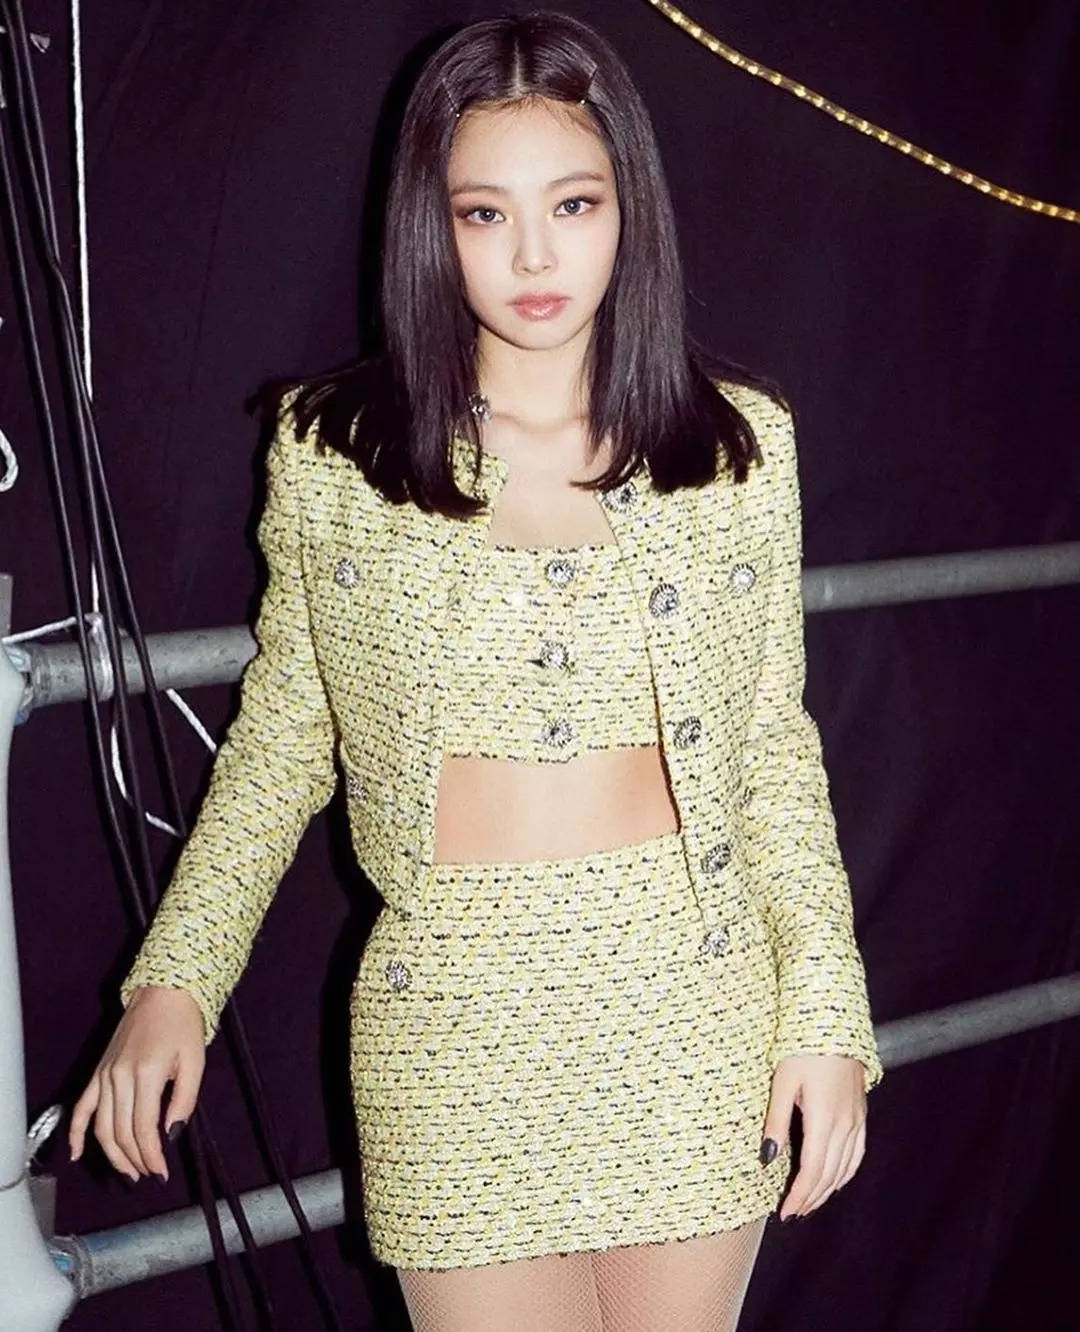 Blackpink's Jennie looks impeccable in tweed; here are her best ensembles